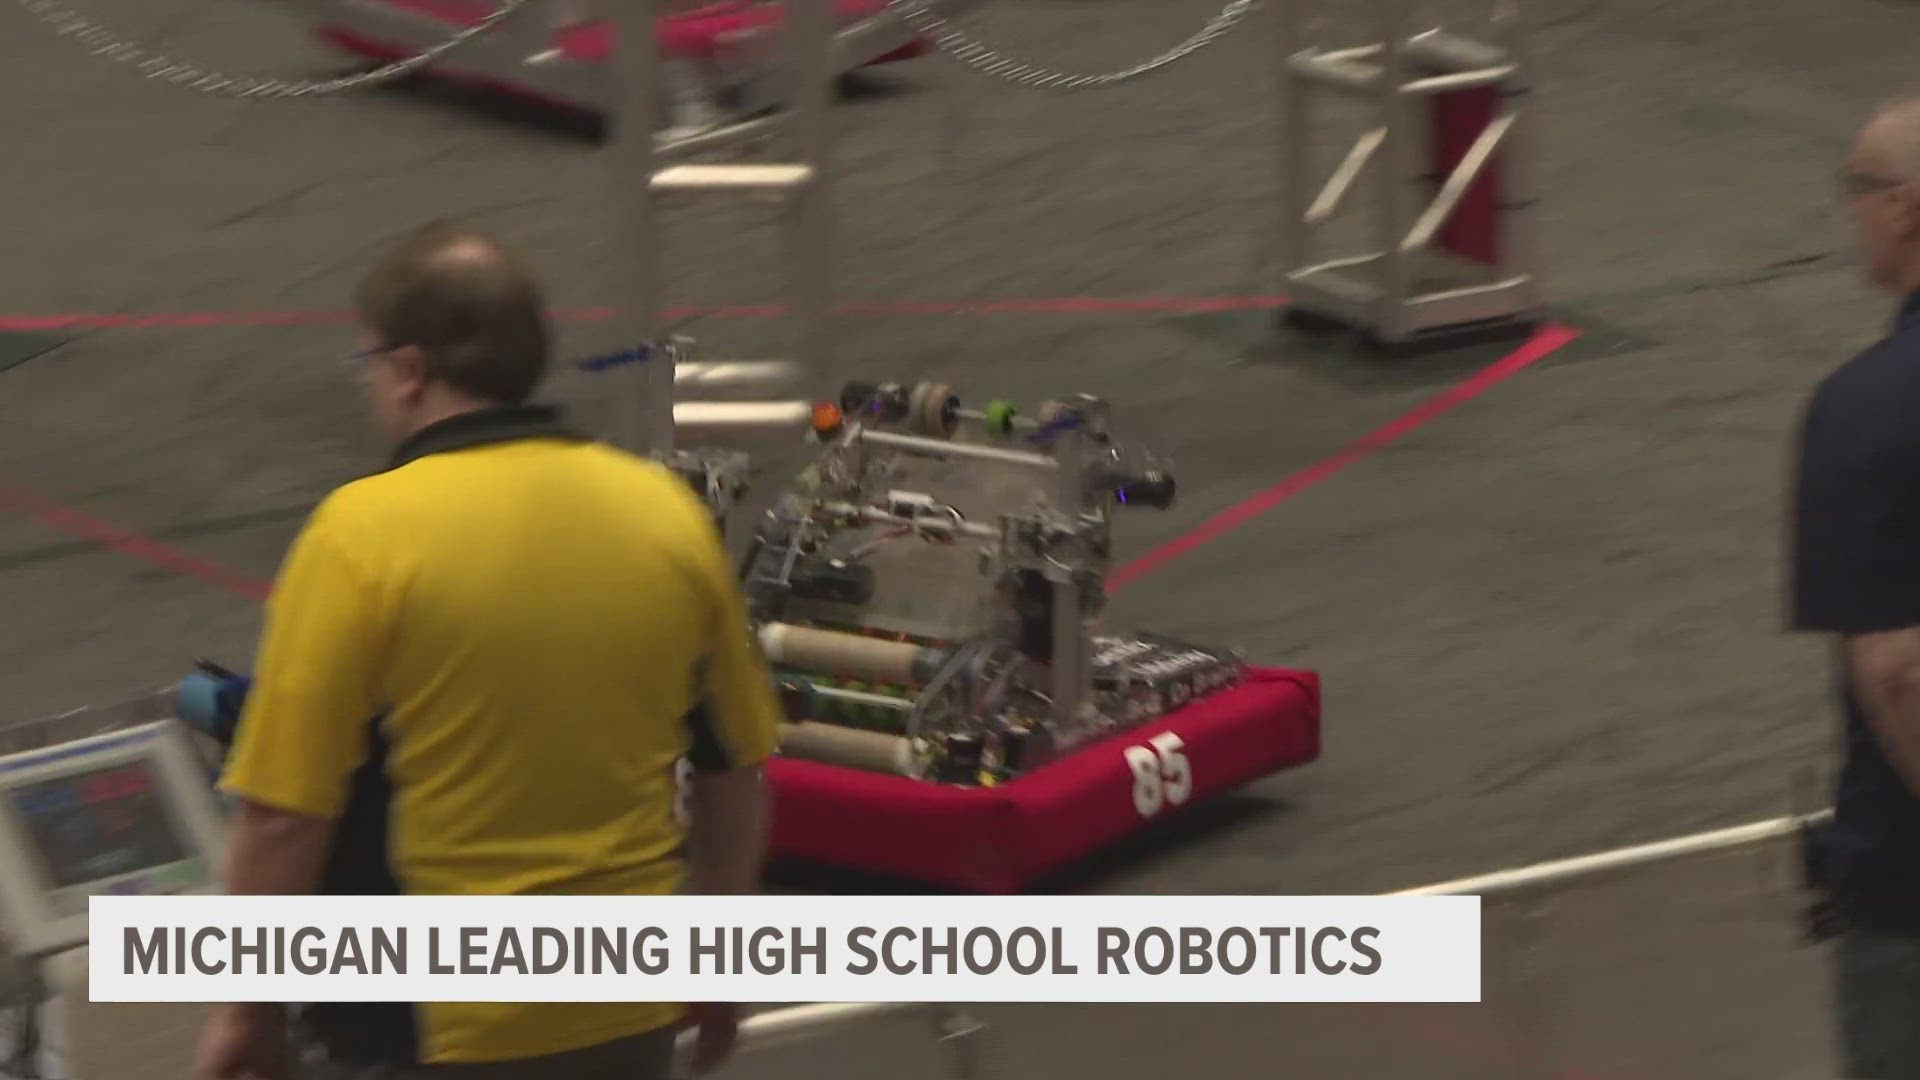 Michigan high schoolers making their mark as leaders in high school robotics, more teams than any other state or country.